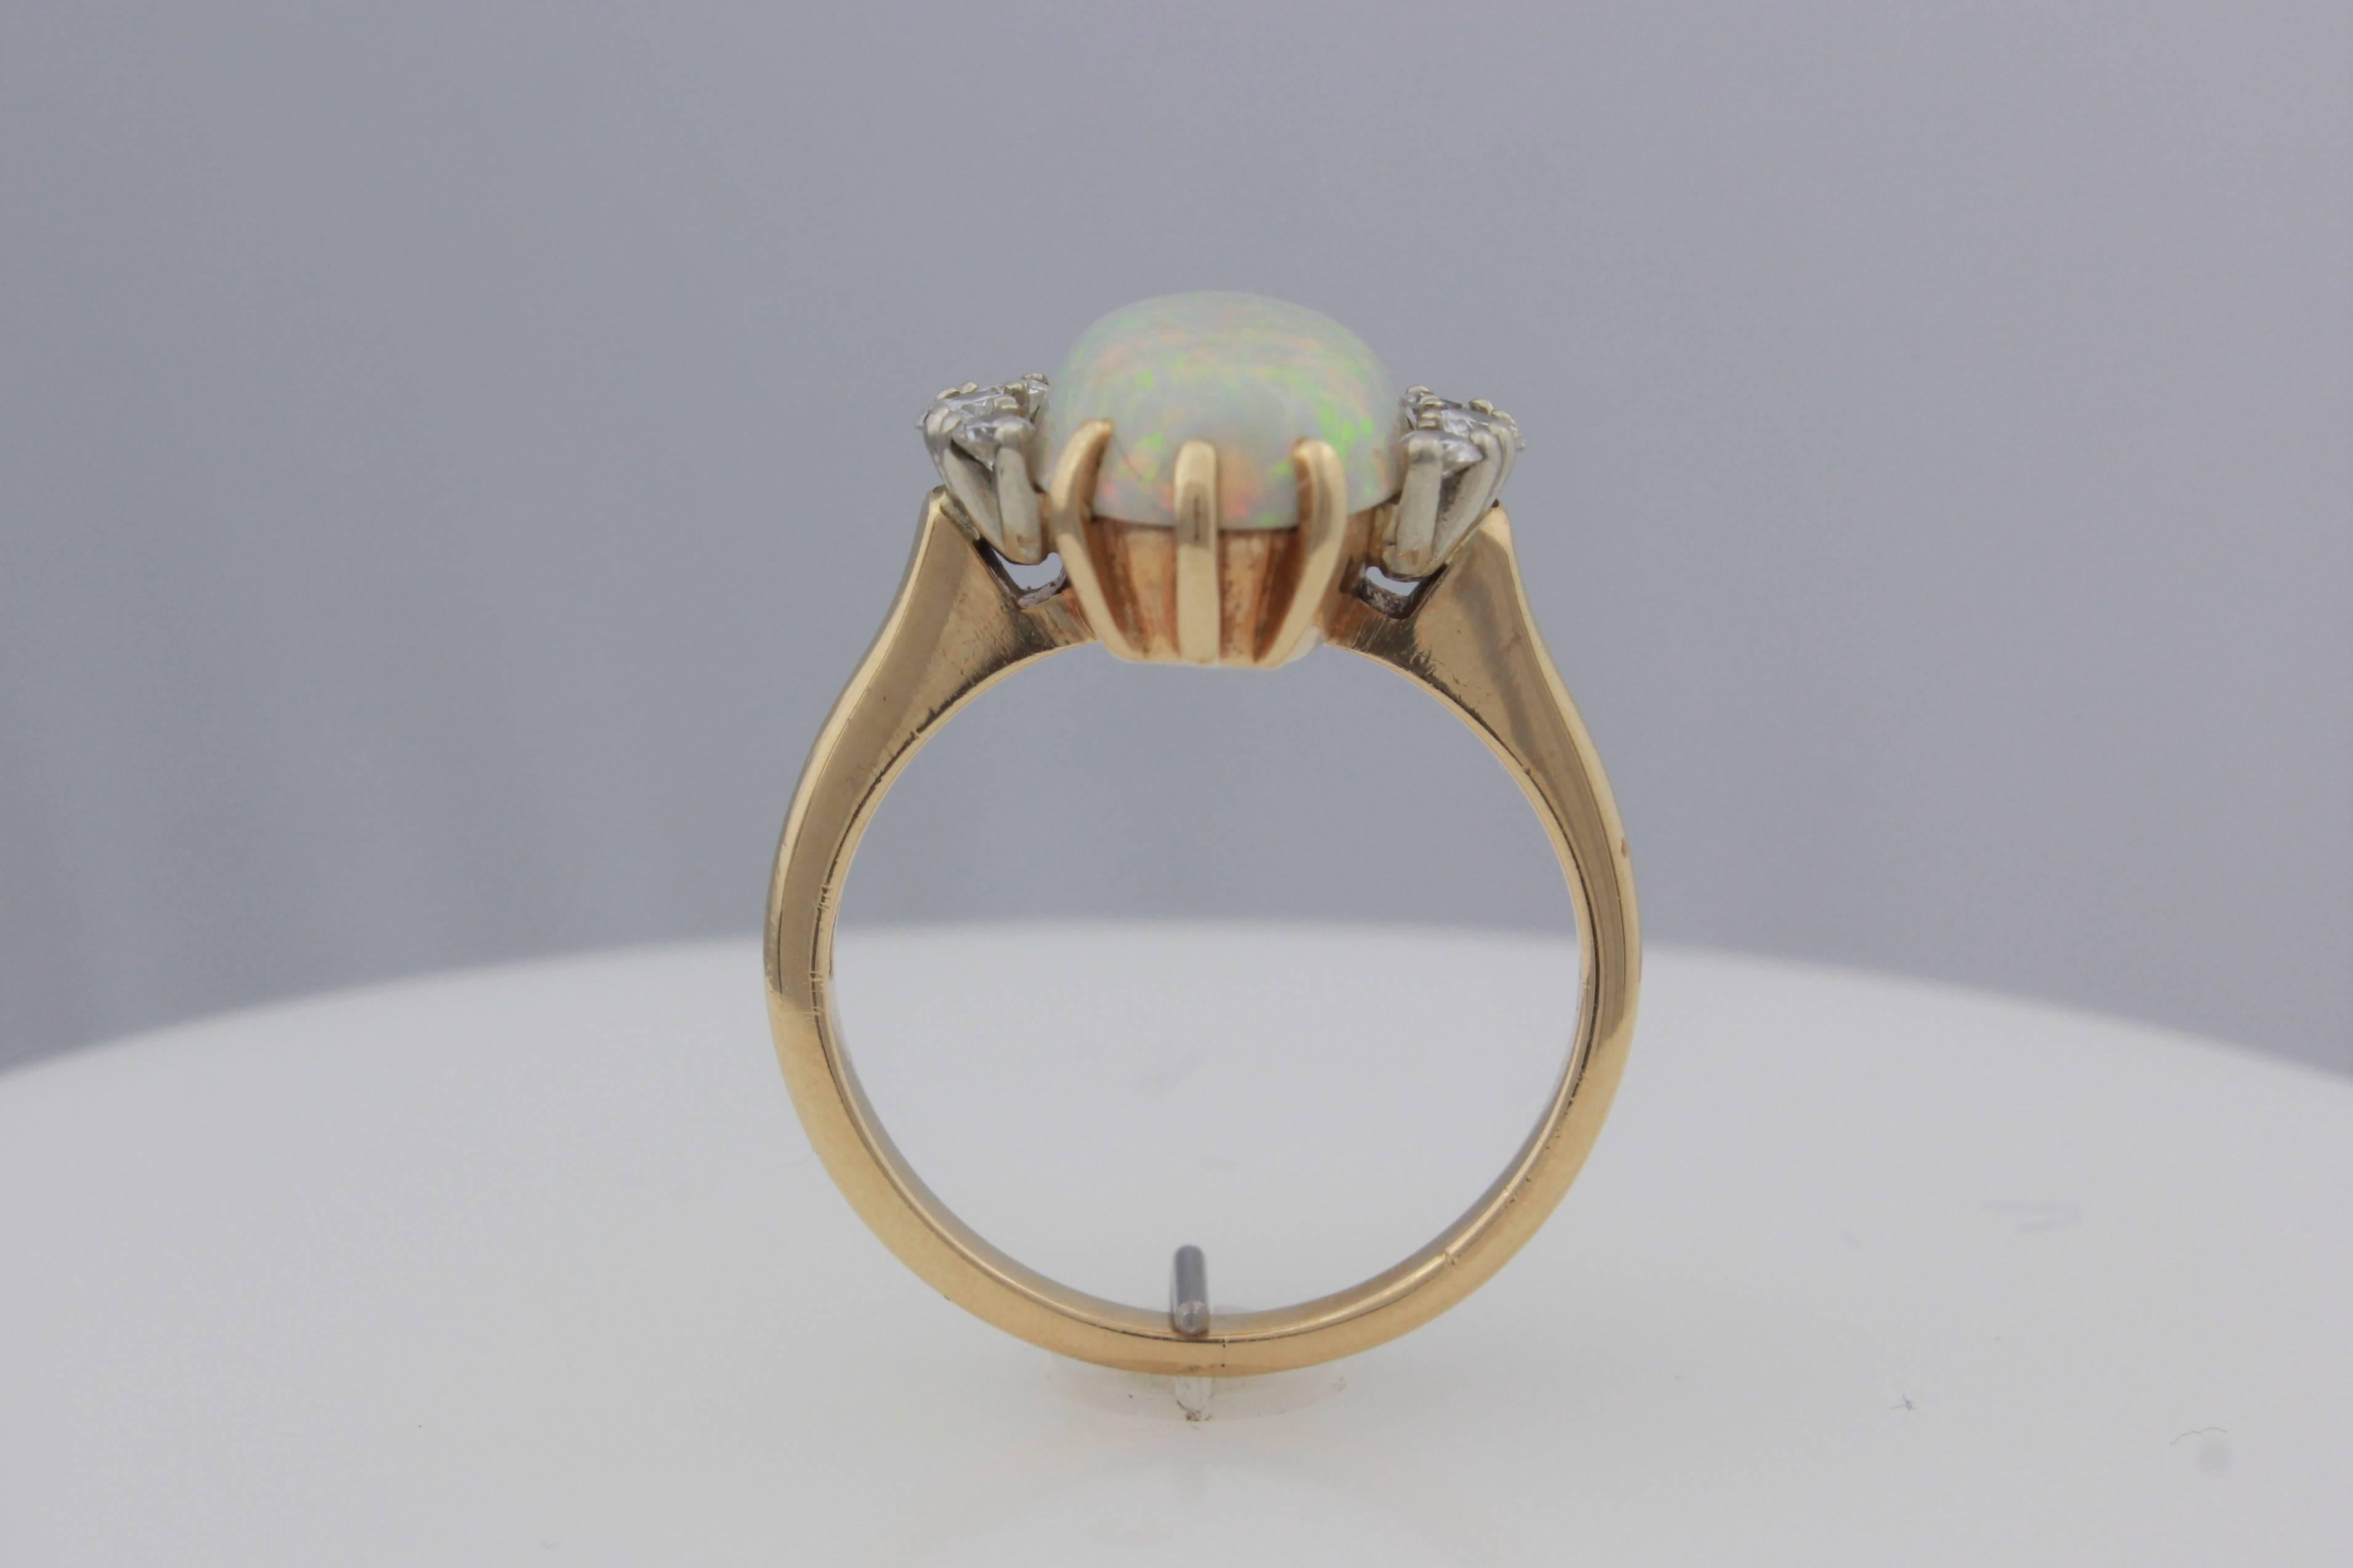 Oval Cut Crystal Opal and Diamond Ring Set in 14 Karat Yellow Gold